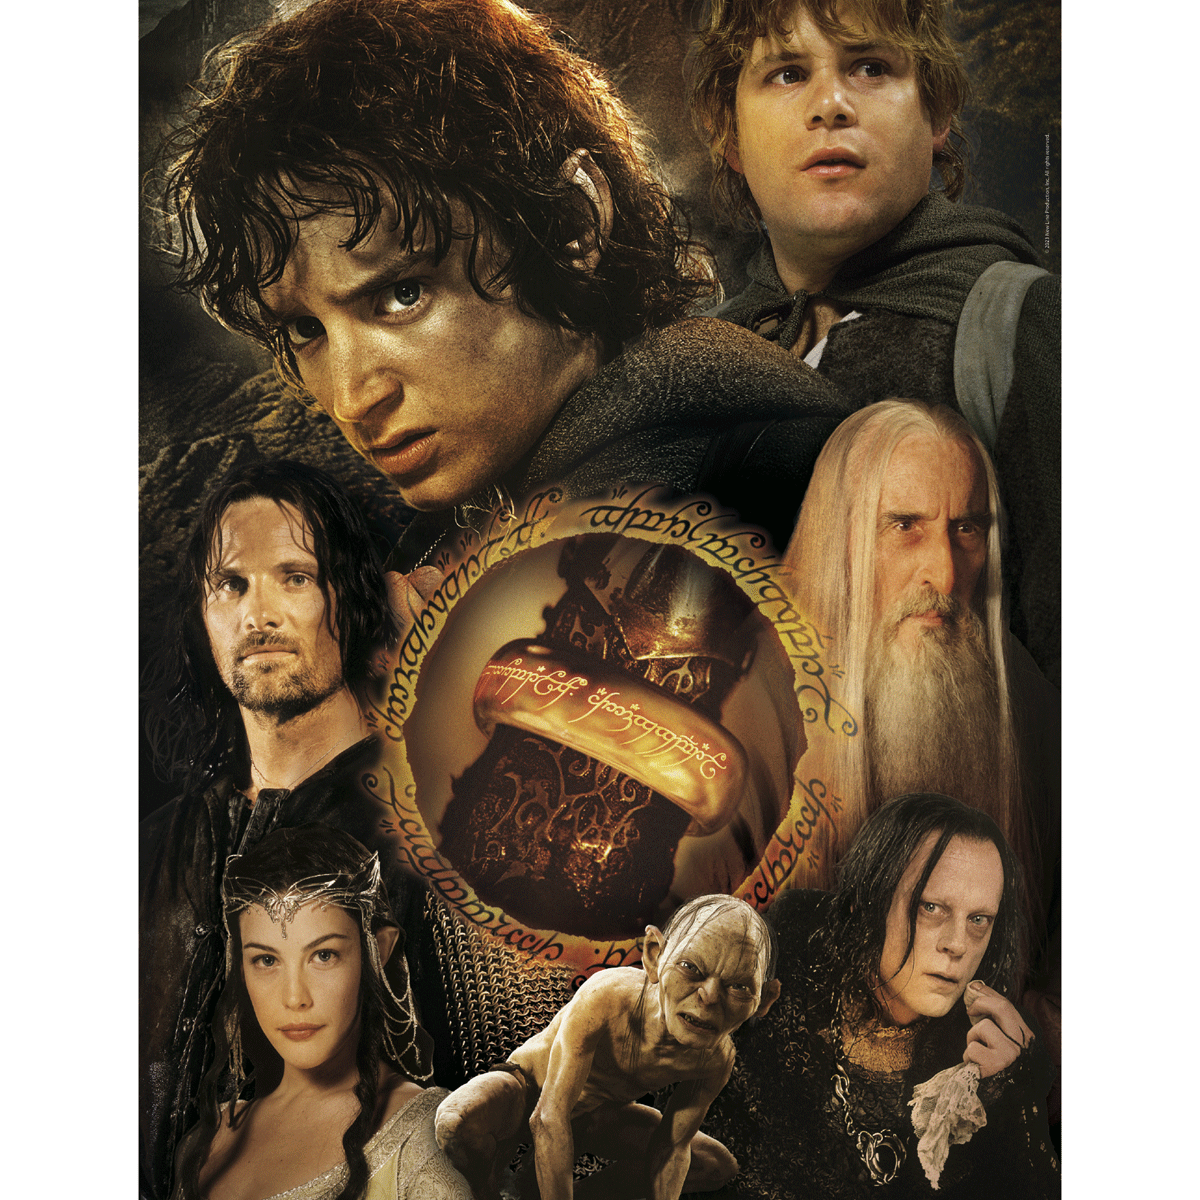 Clementoni puzzle the lord of the rings - 1000 pezzi, puzzle adulti - CLEMENTONI